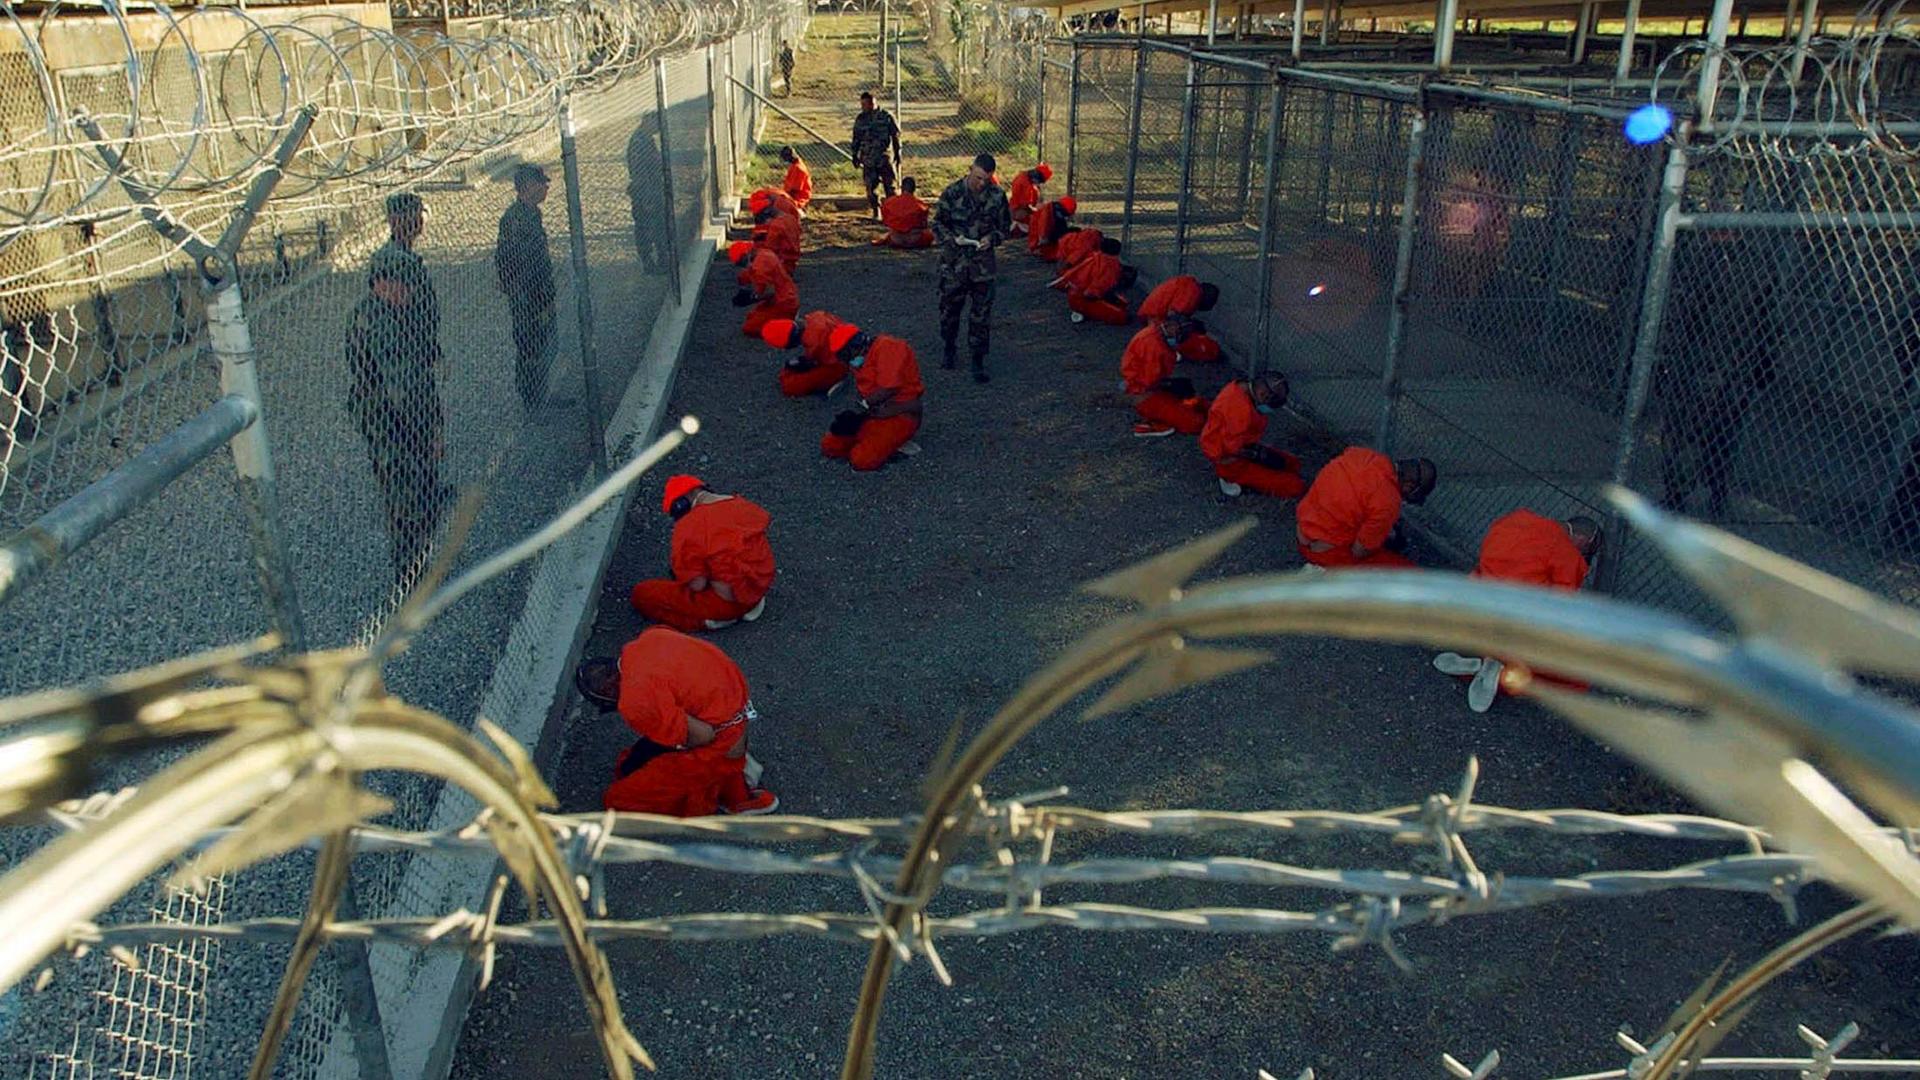 Detainees in orange jumpsuits sit in a holding area under the watchful eyes of military police during in-processing to the temporary detention facility at Naval Base Guantanamo Bay in January 2002.